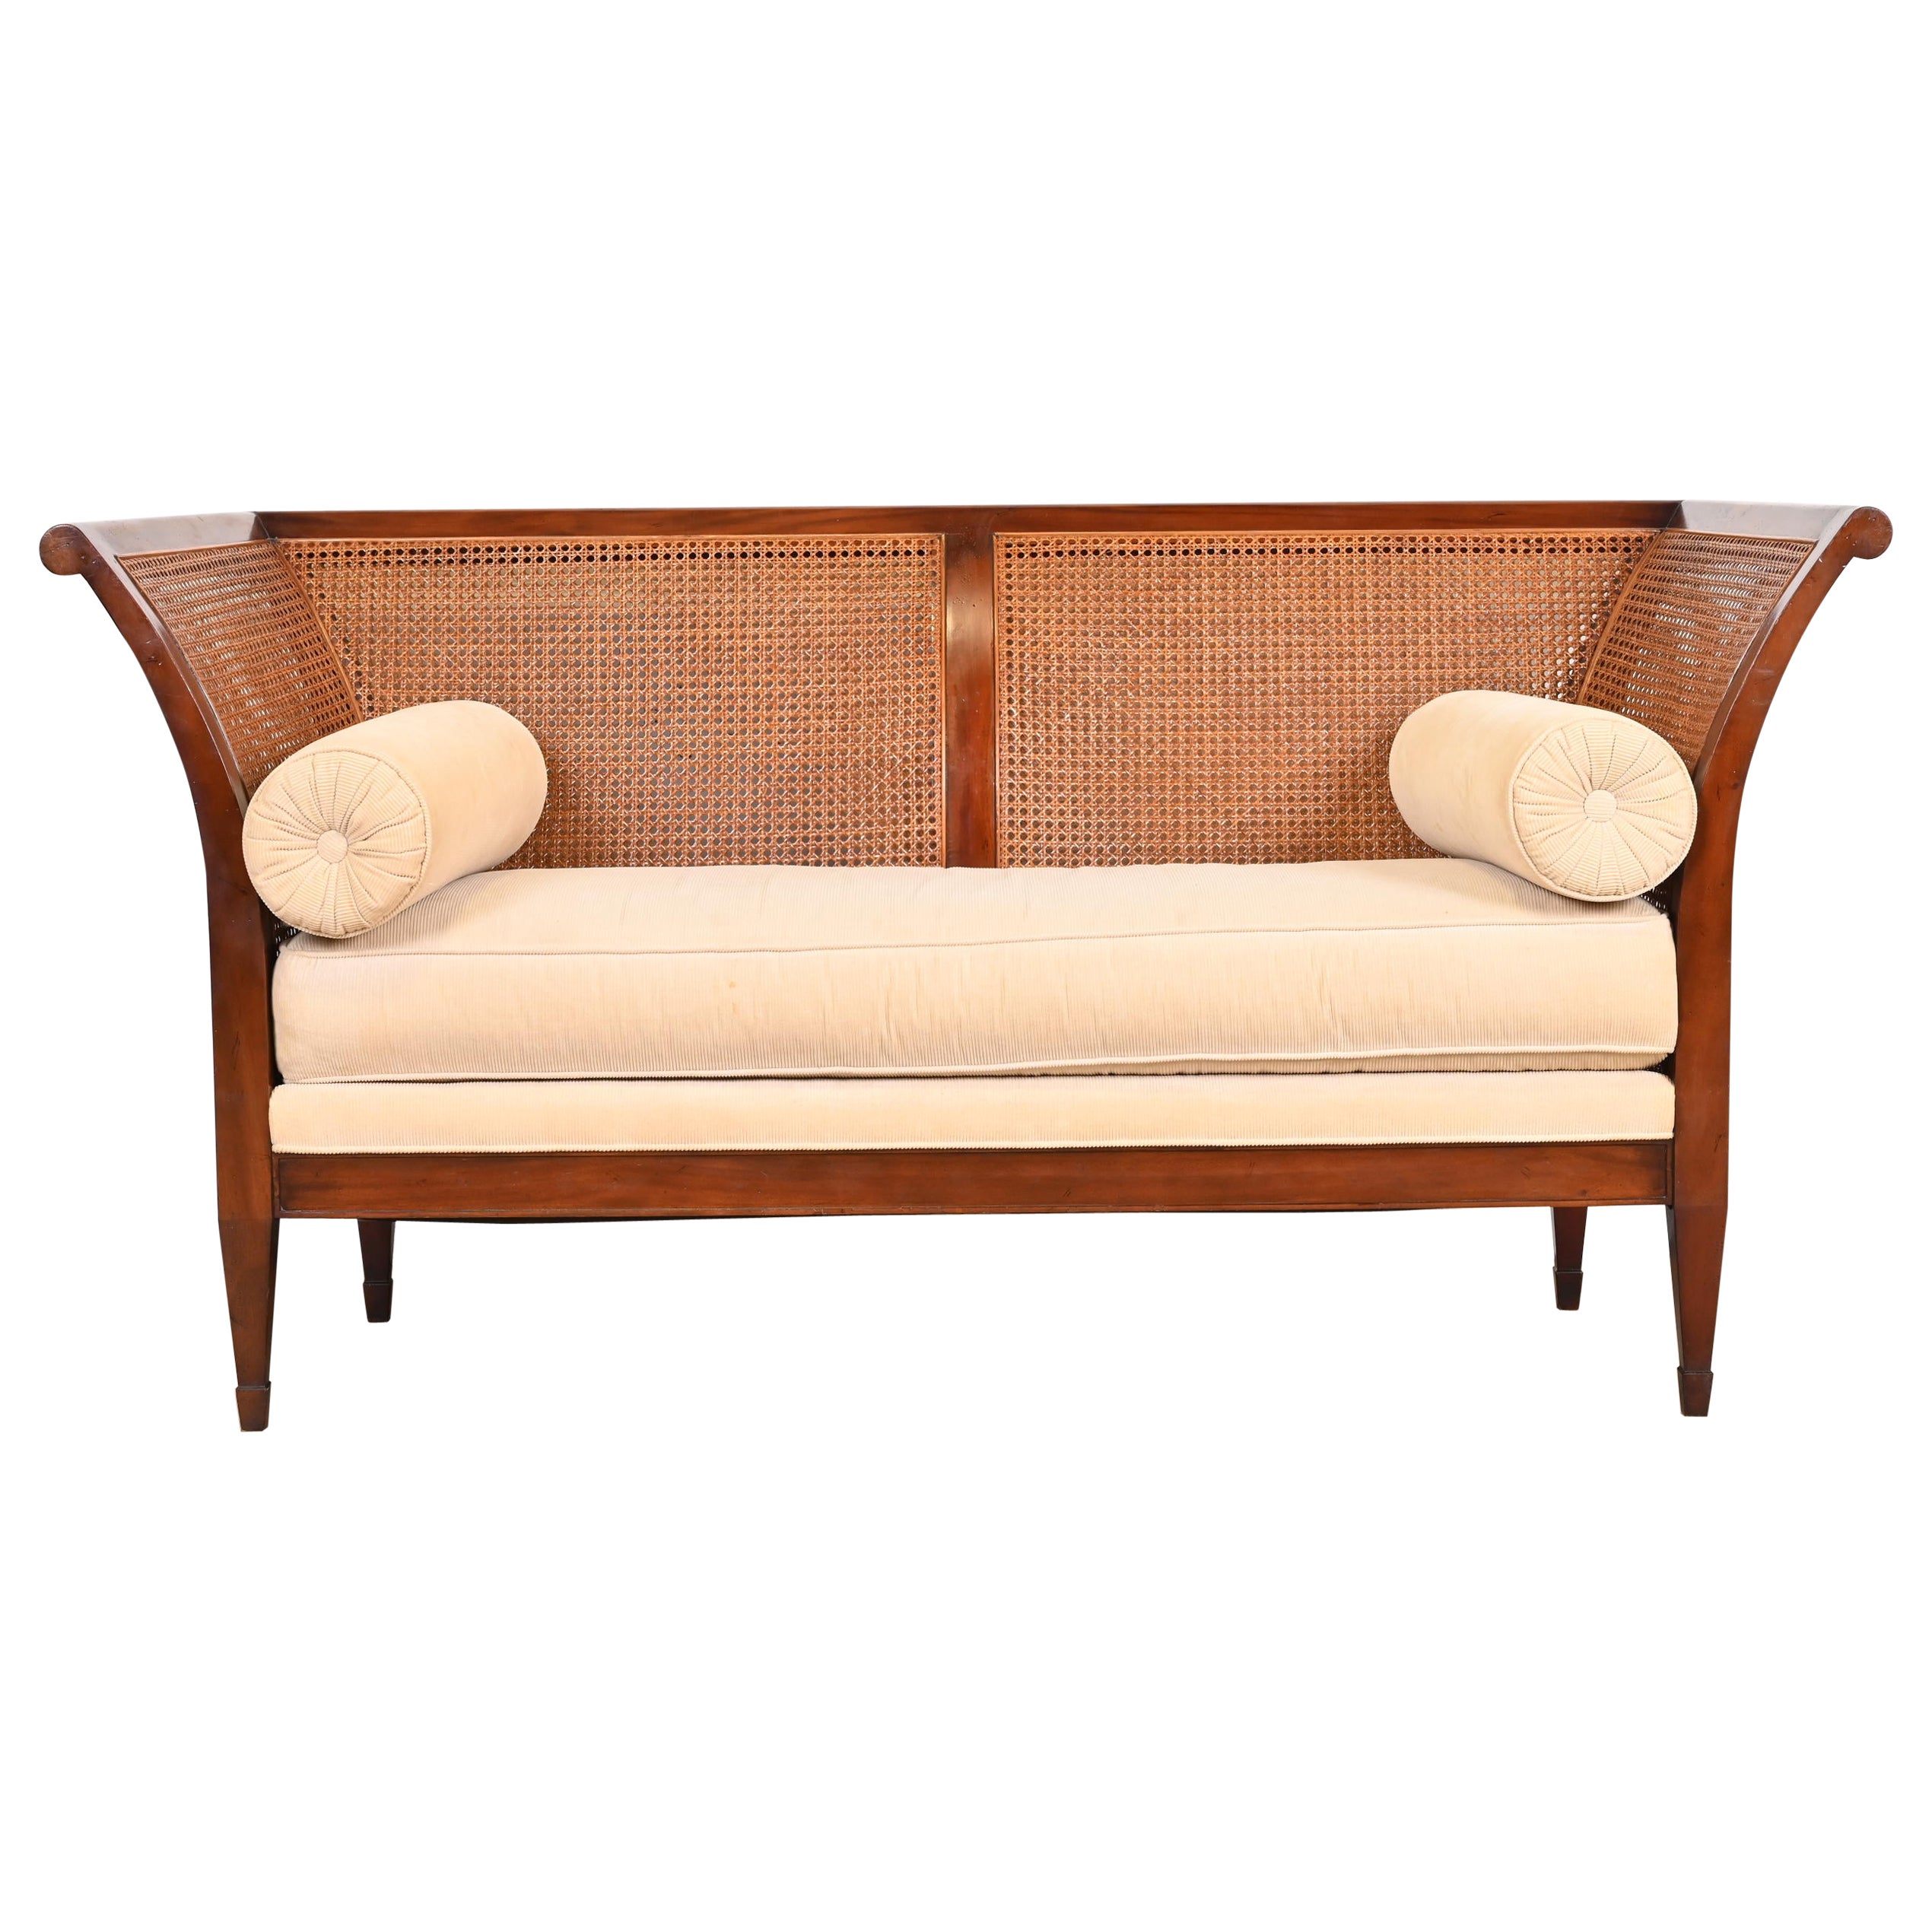 Baker Furniture Regency Mahogany and Cane Settee